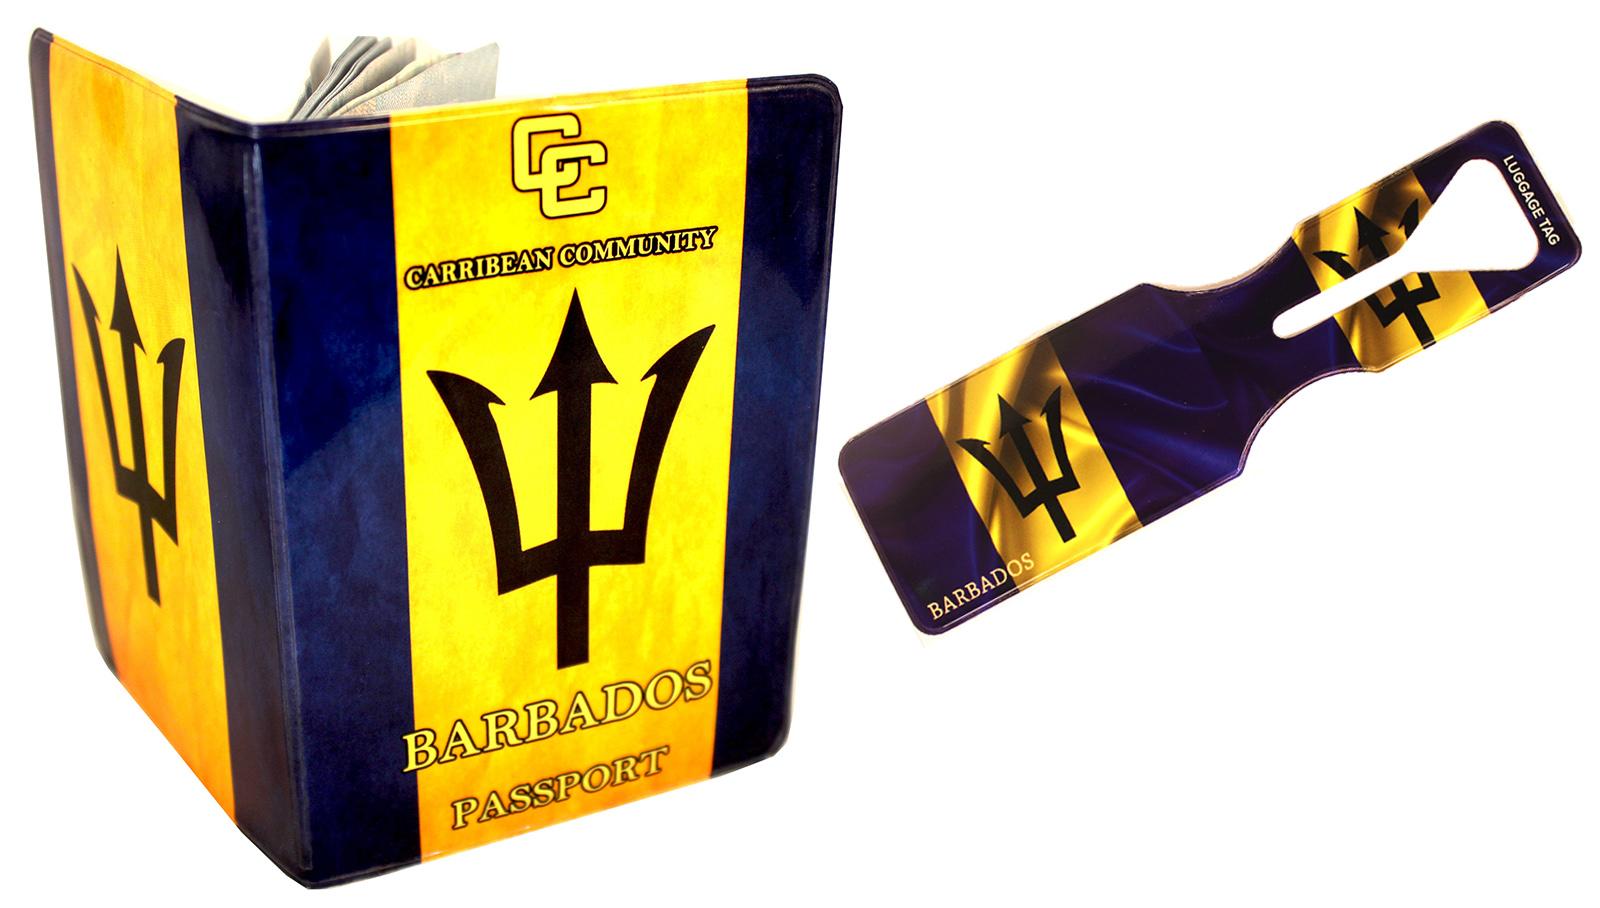 Barbados Passport Cover and Luggage Tag Set